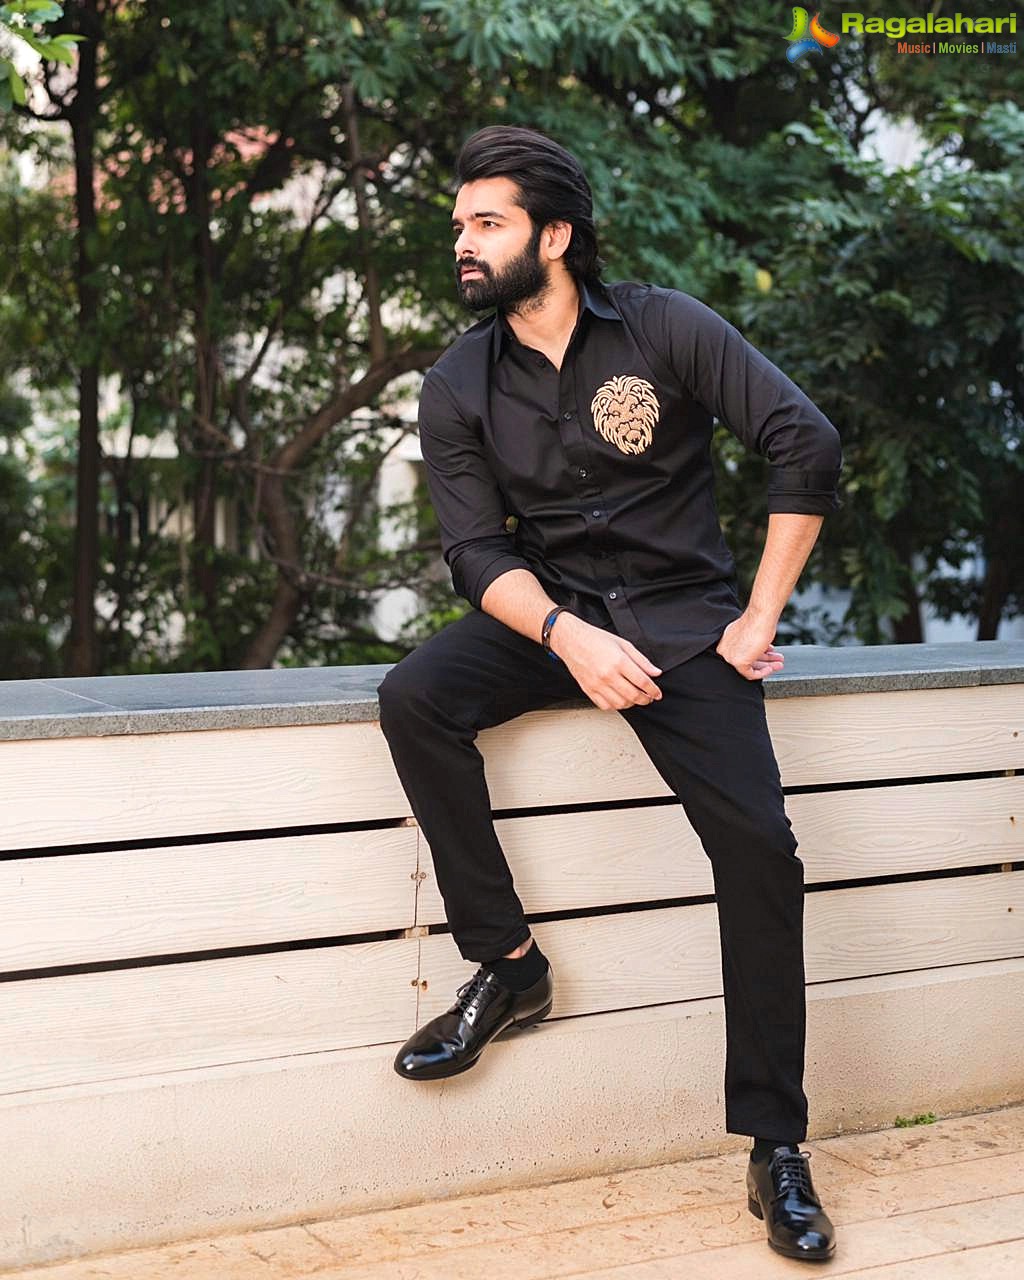 Ram Pothineni Stylish Formal Look in All Black Outfit